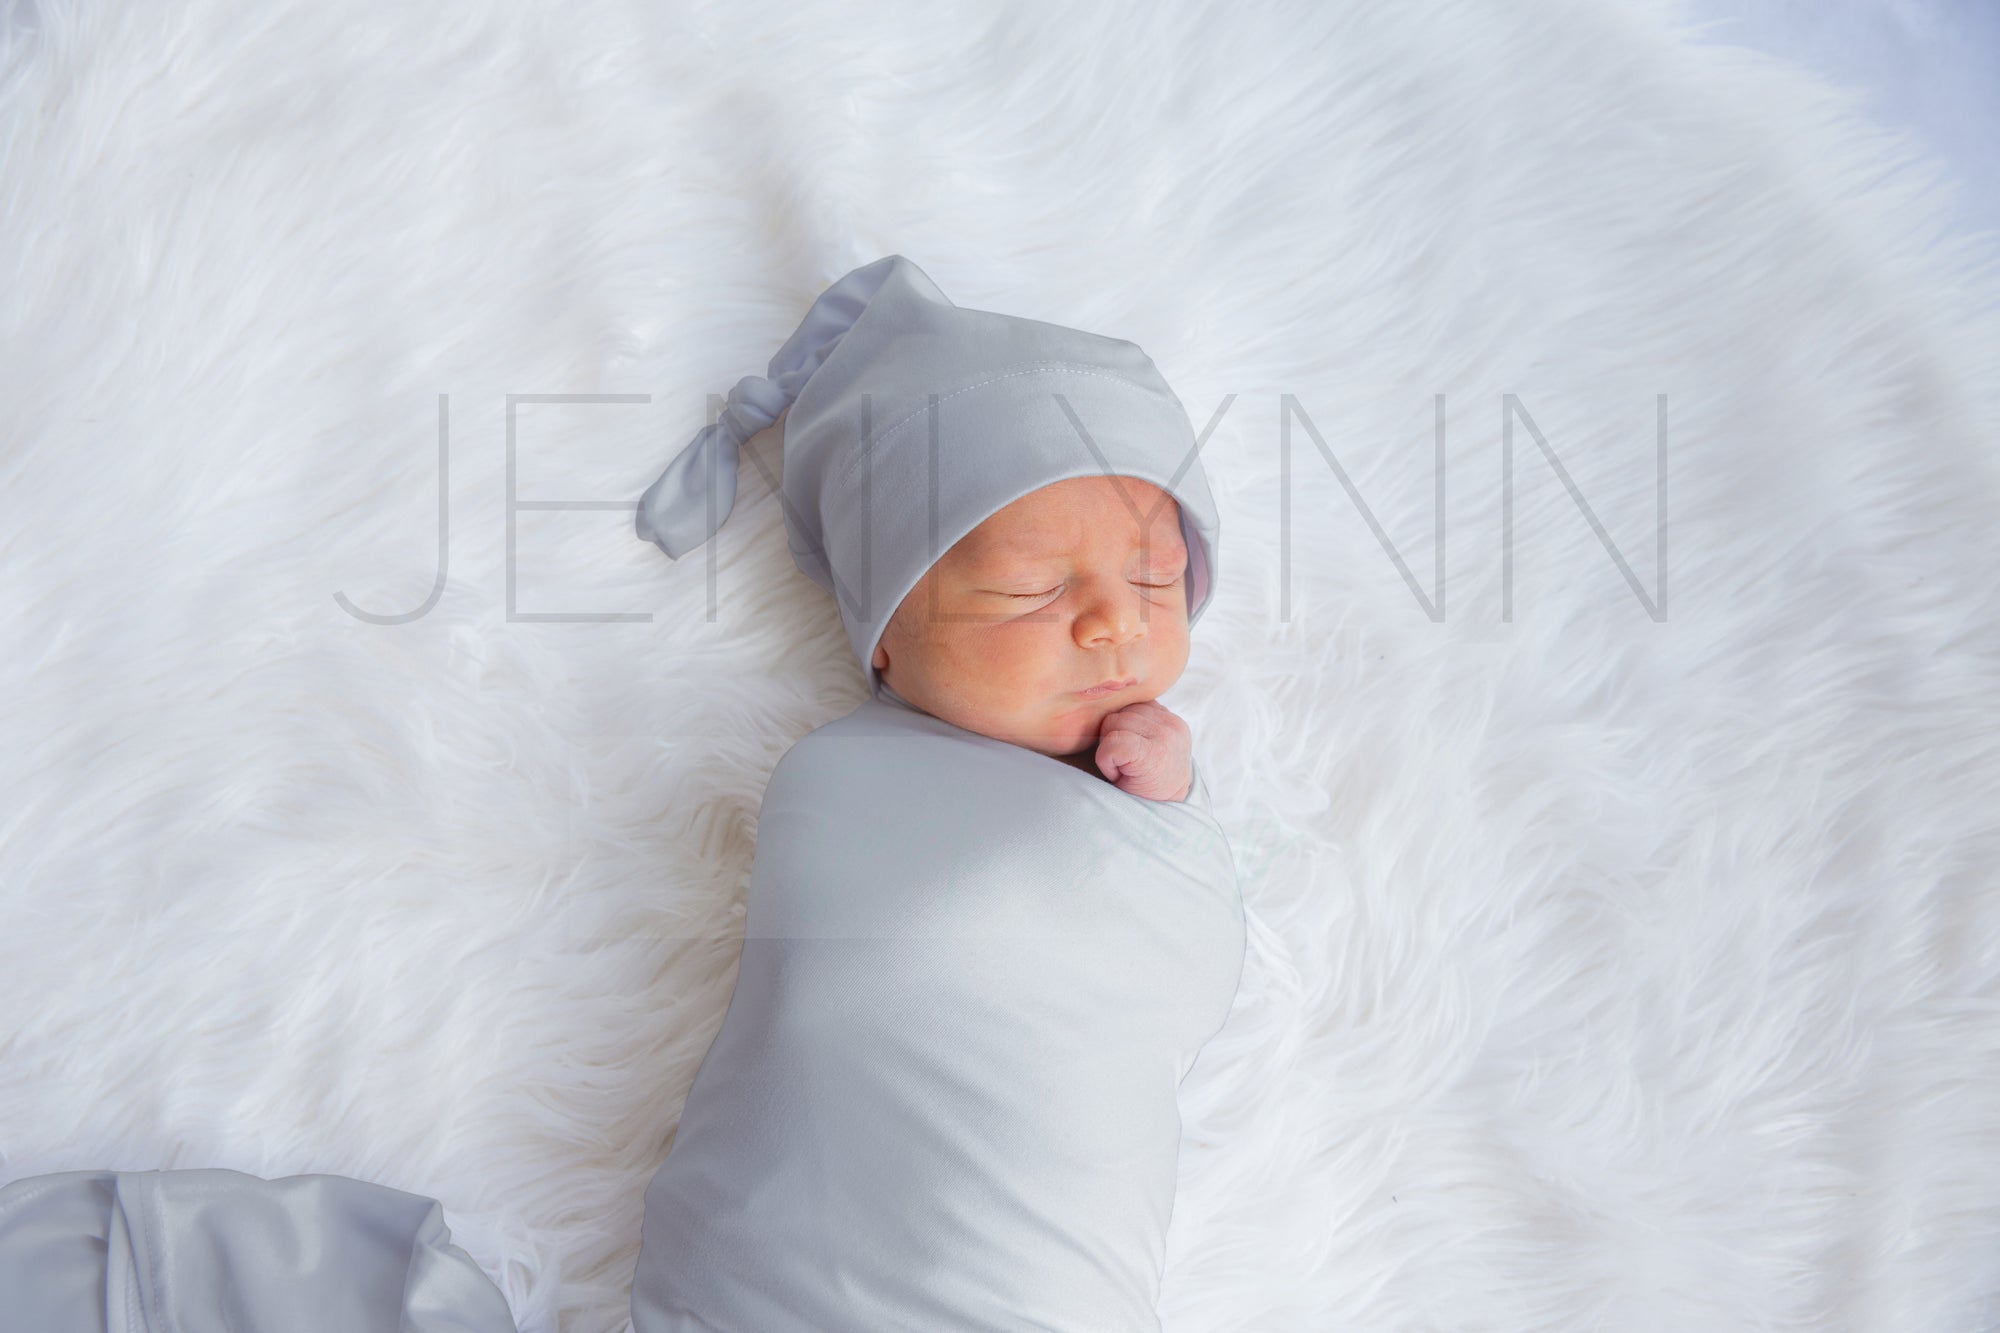 Stretch Jersey Blanket with knotted hat on baby Mockup #JZ16 PSD